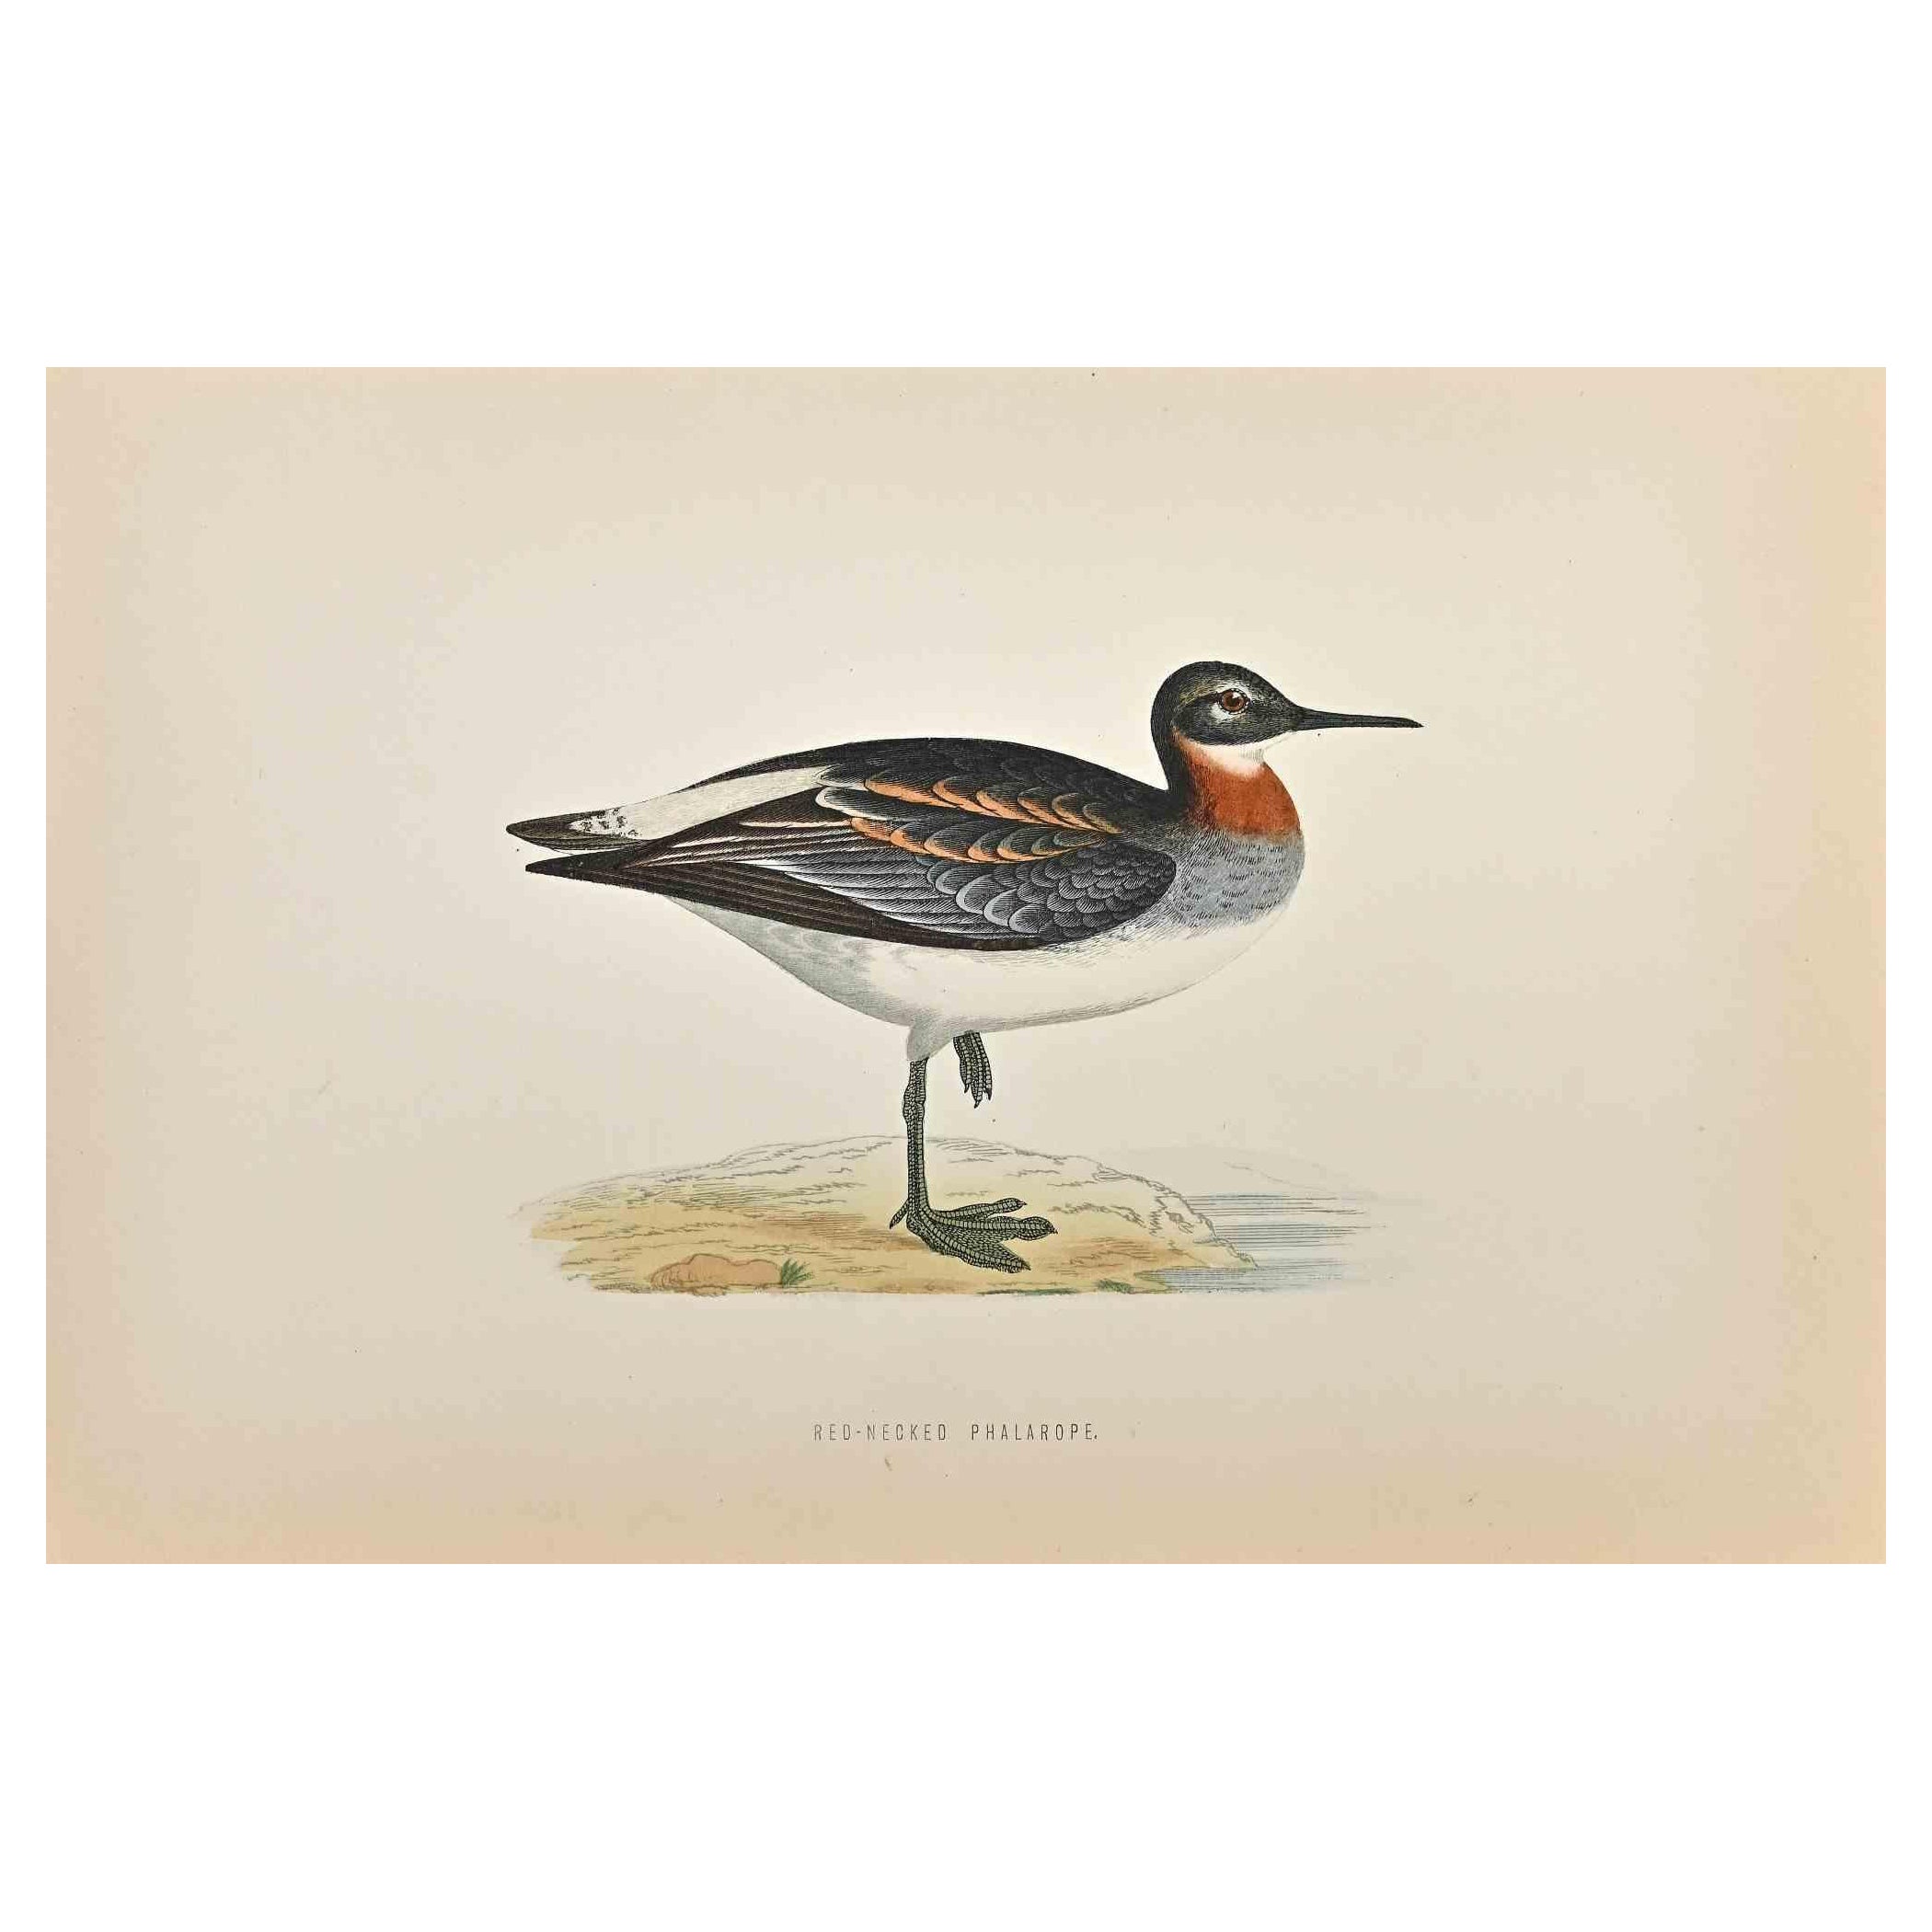 Red-Necked Phalarope is a modern artwork realized in 1870 by the British artist Alexander Francis Lydon (1836-1917). 

Woodcut print on ivory-colored paper.

Hand-colored, published by London, Bell & Sons, 1870.  

The name of the bird is printed on